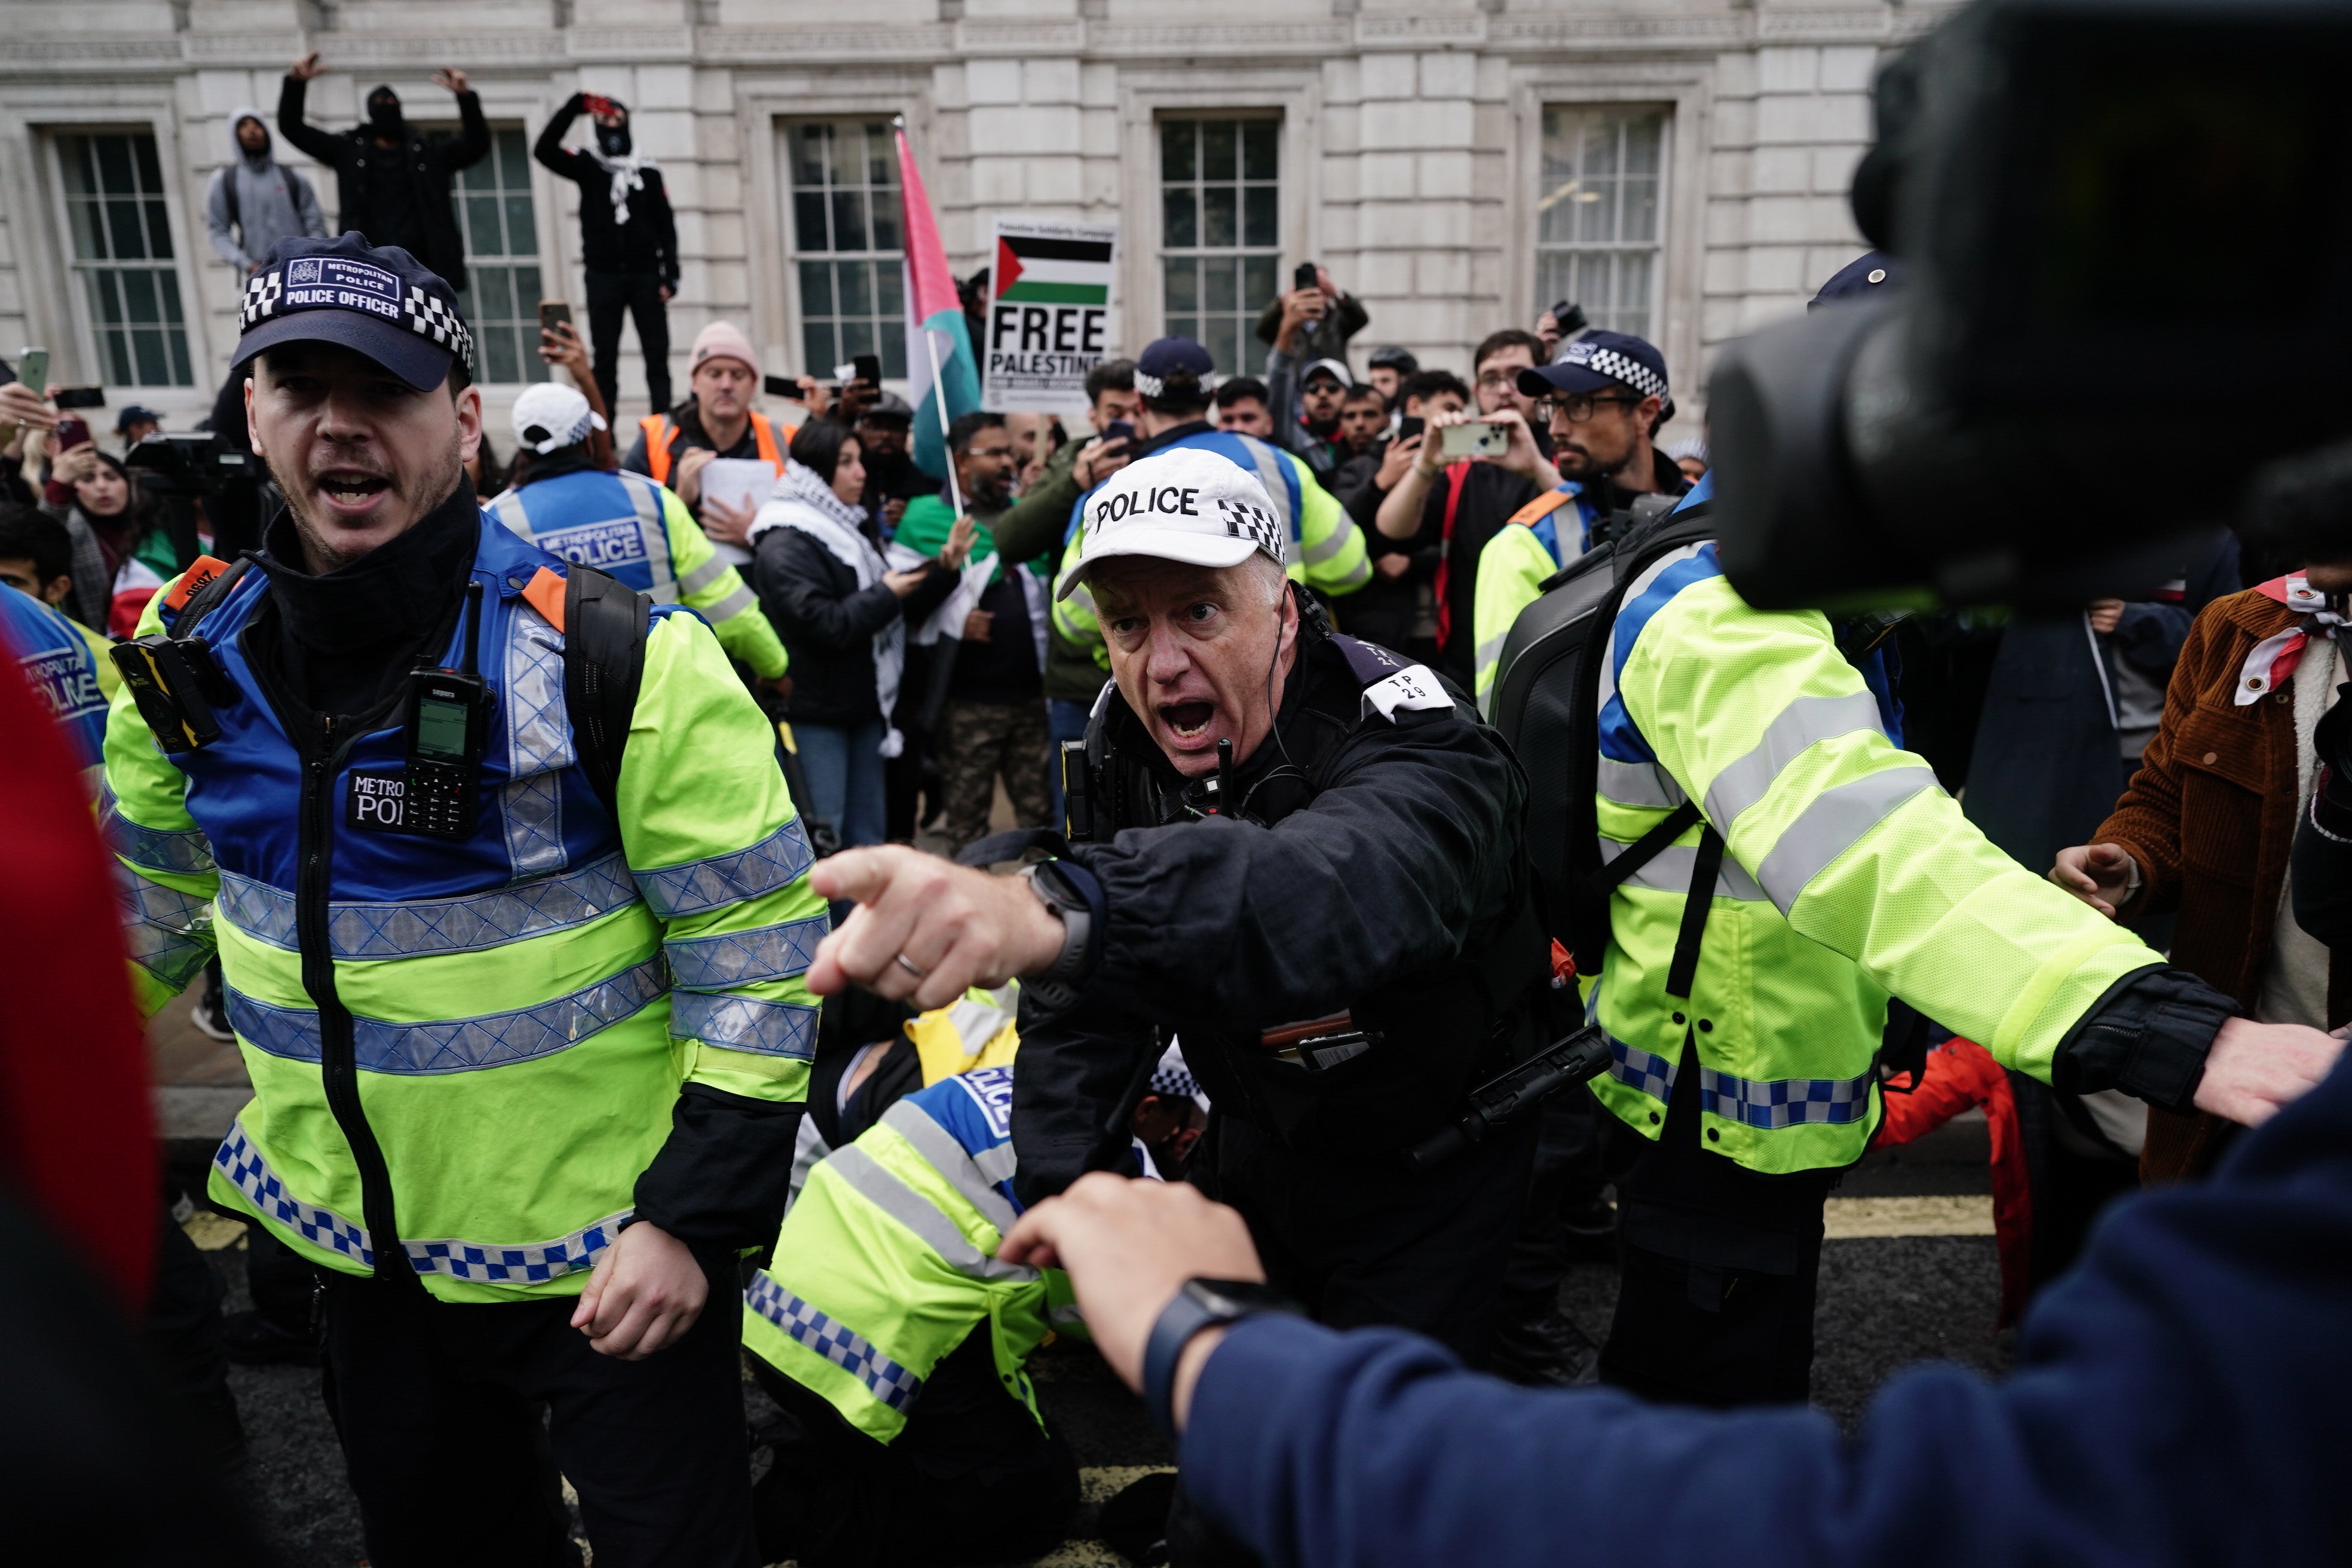 Police said a number of counter-protest groups seemed ‘intent on seeking confrontation with the main Palestinian march’